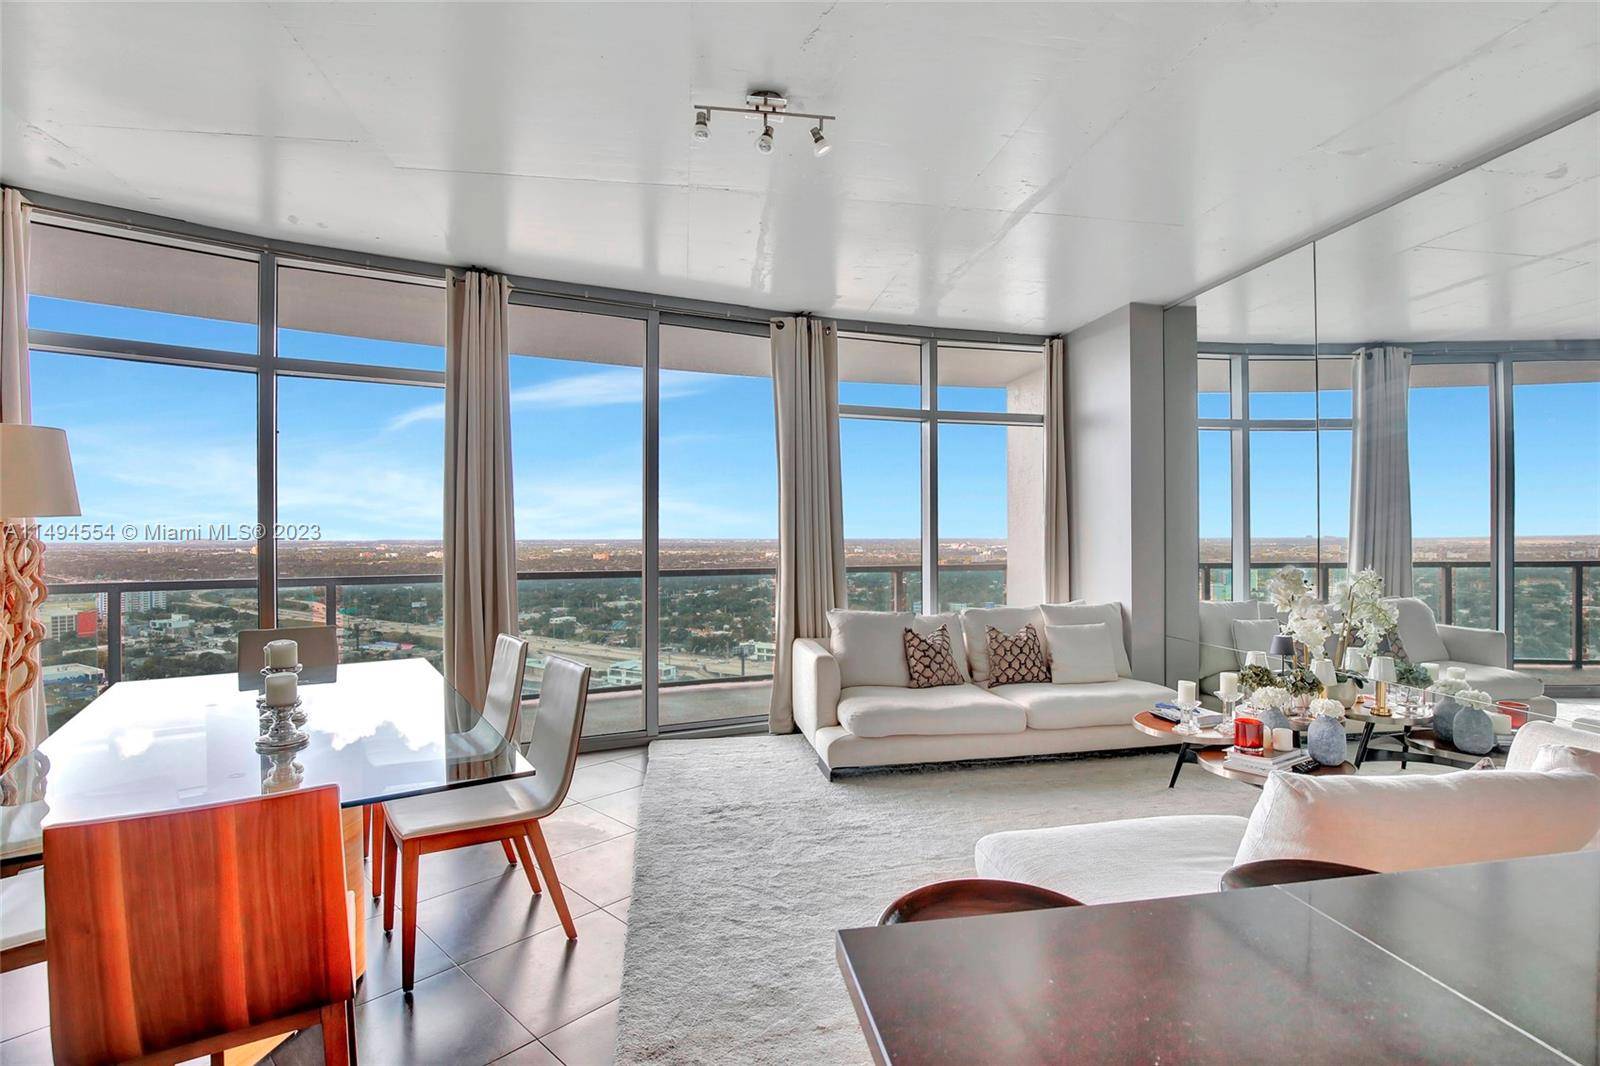 Stunning and spacious 2 bedroom, 2 bathroom residence in a 32 story upscale high rise located in Midtown Miami.